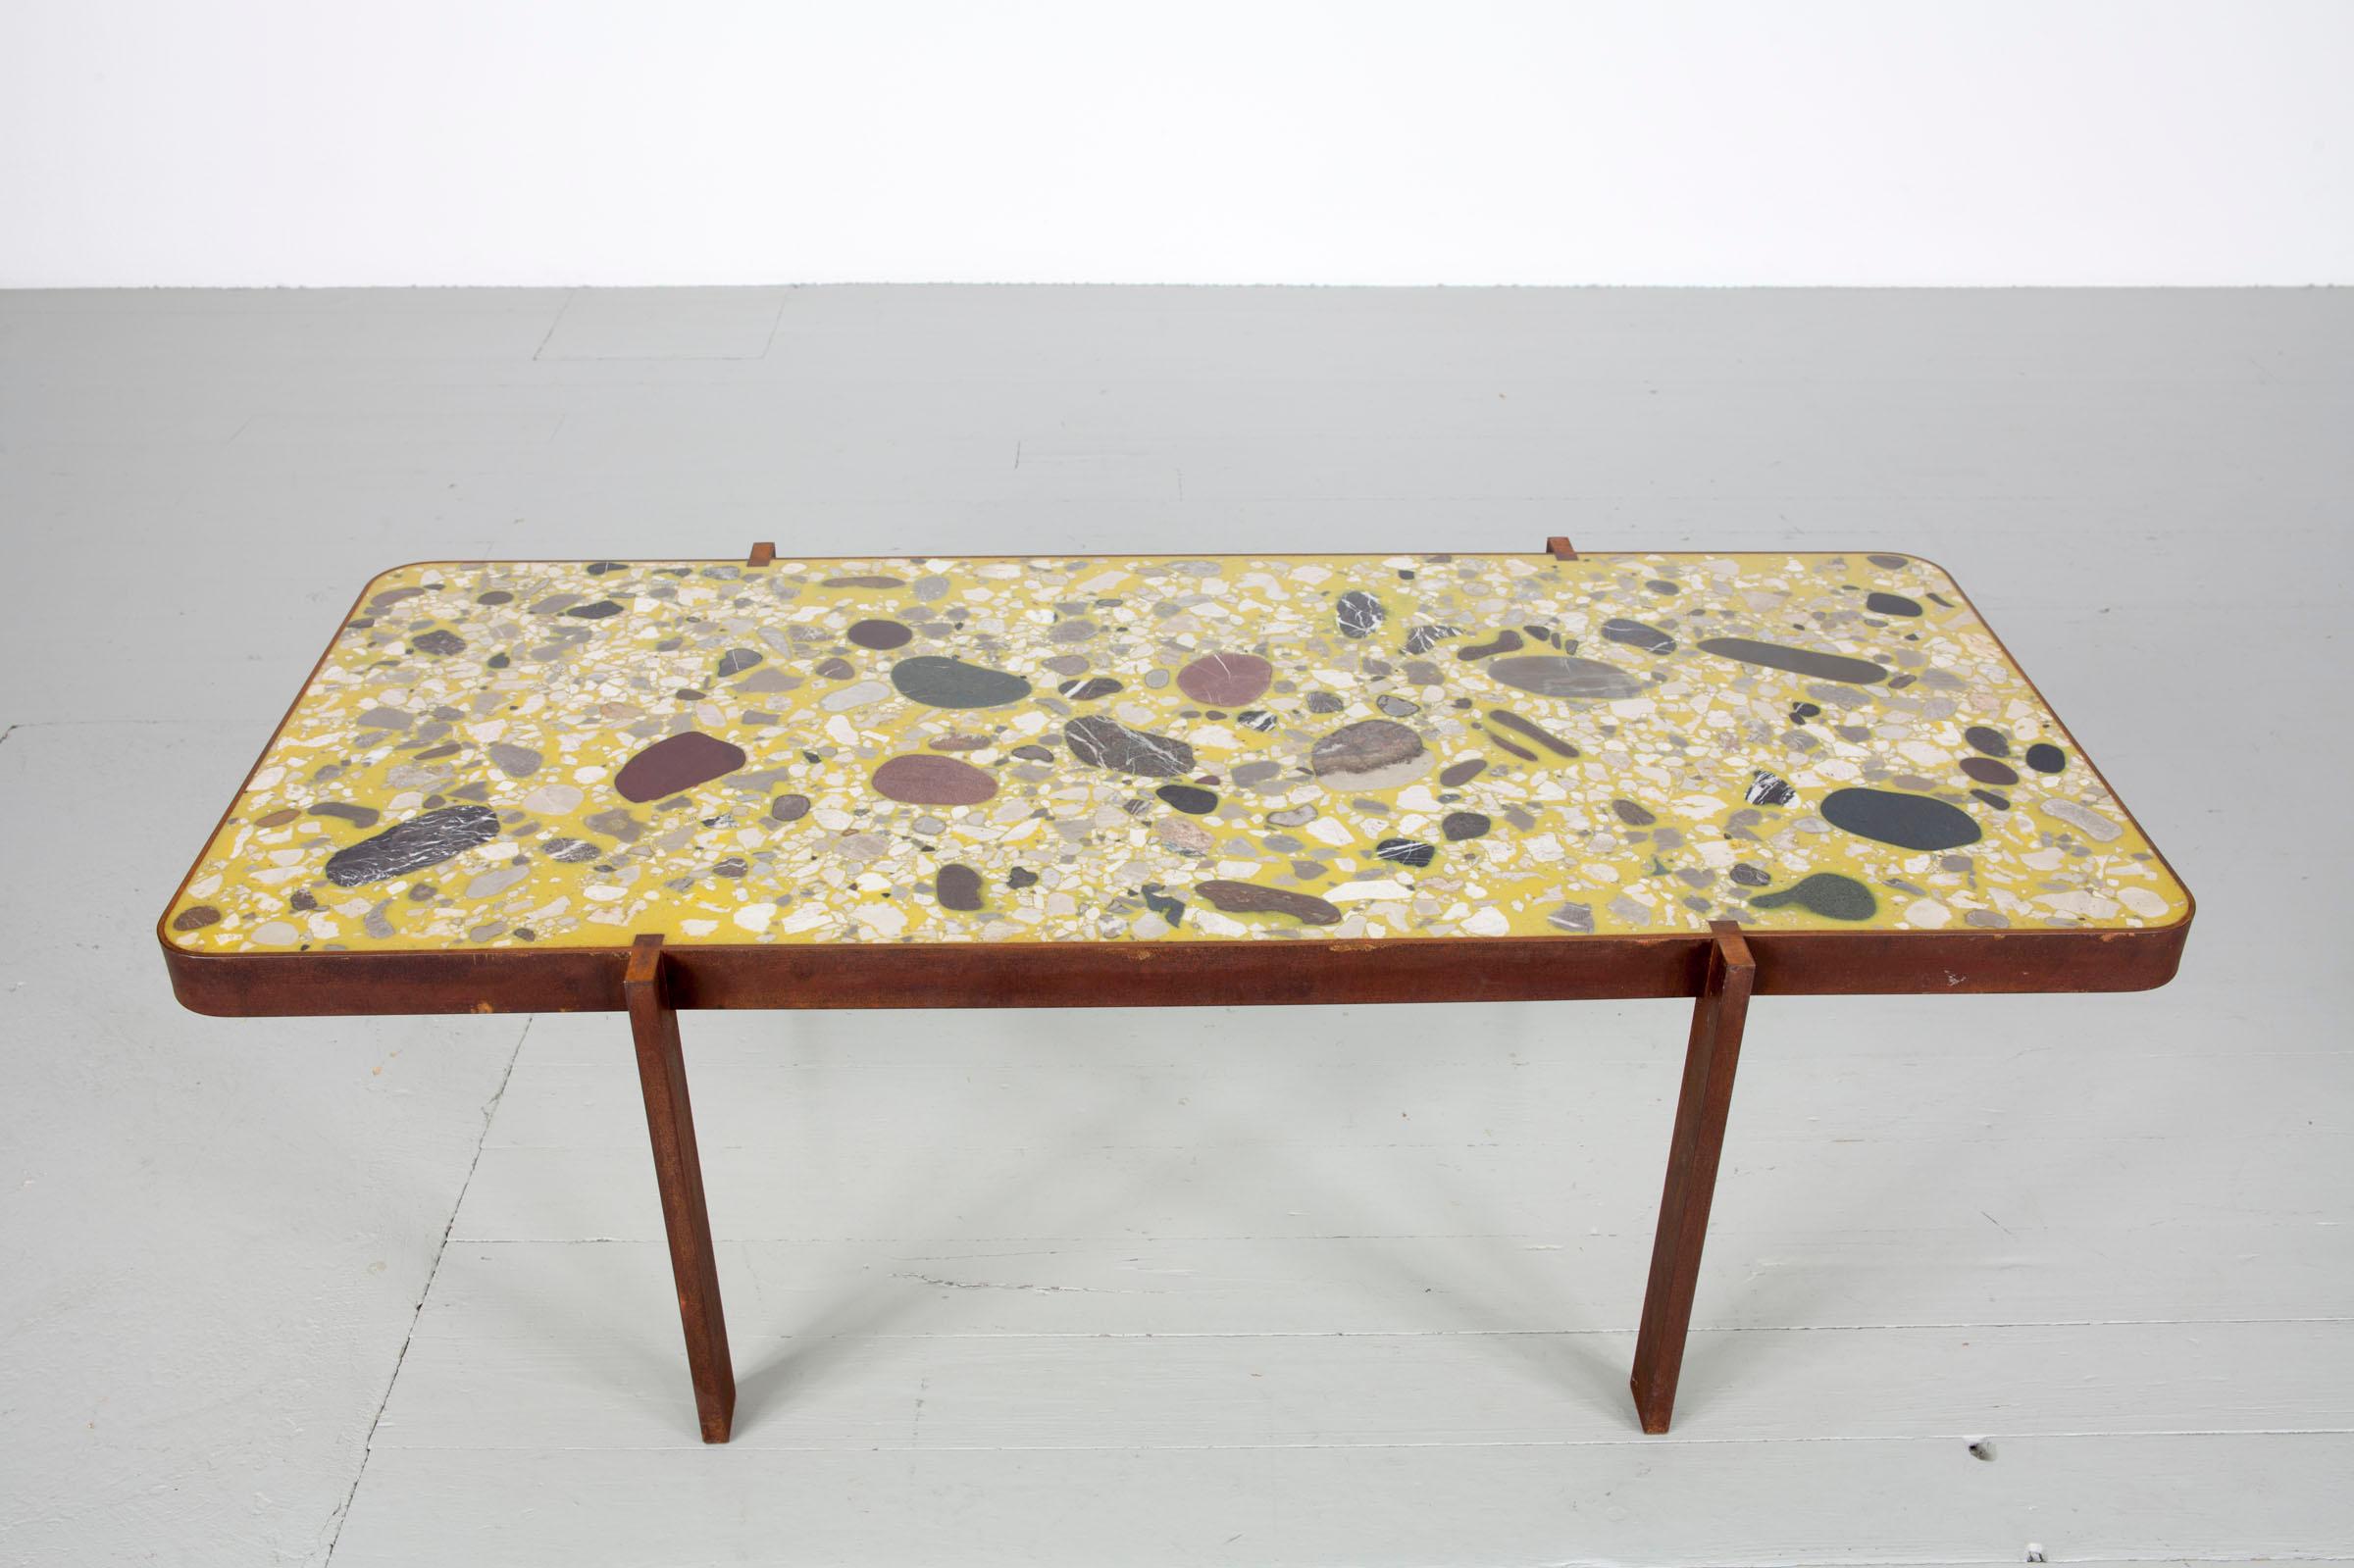 Felix Muhrhofer Contemporary Terrazzo Table with Corroded Steel Construction For Sale 4